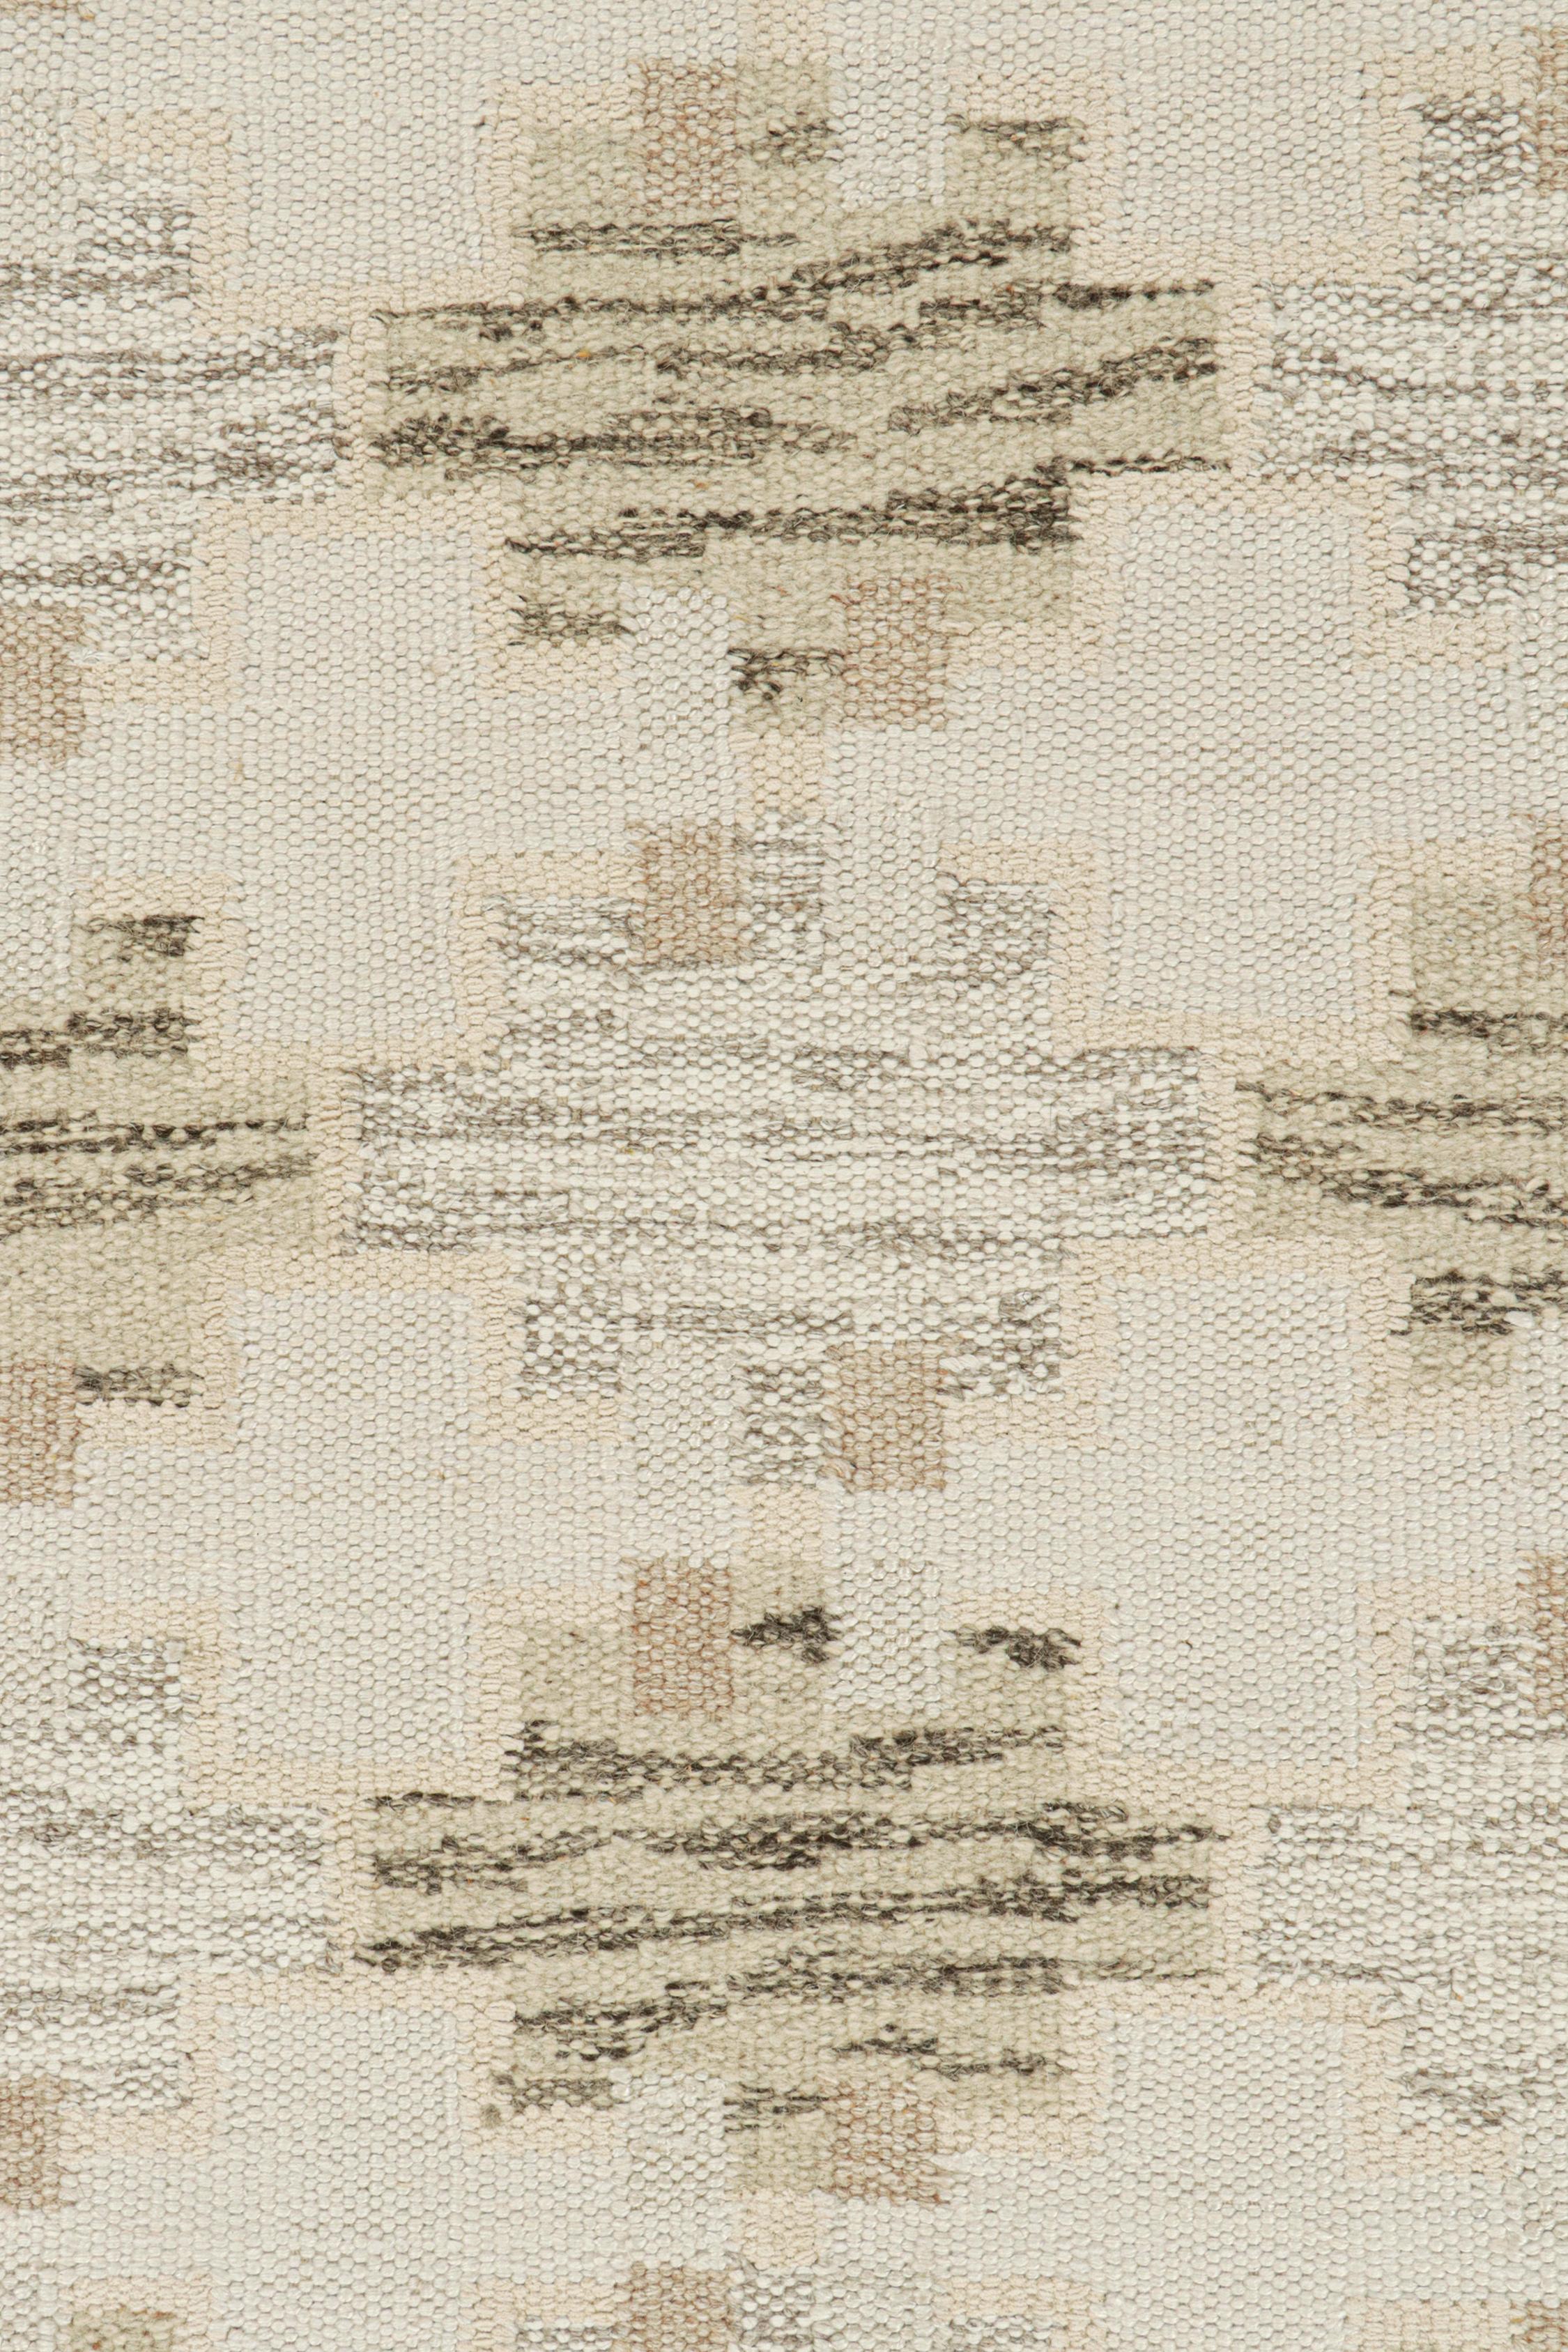 Rug & Kilim’s Scandinavian Style Kilim in White & Beige-Brown Geometric Patterns In New Condition For Sale In Long Island City, NY